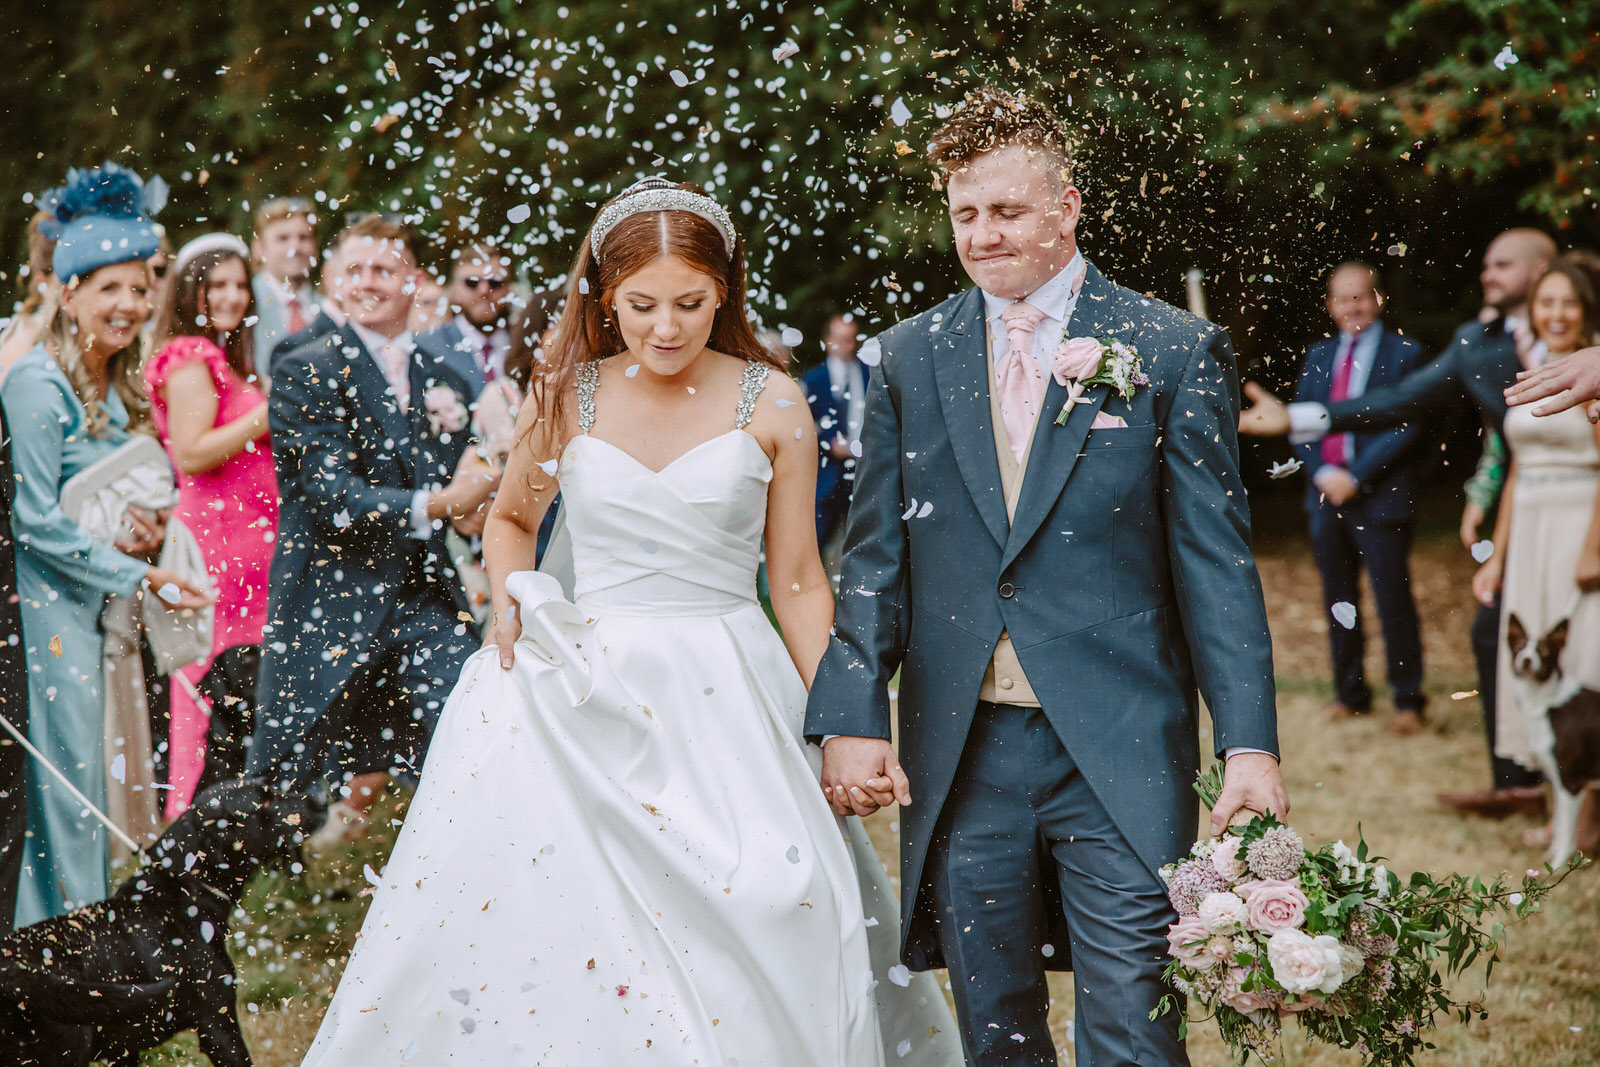 A bride and groom walk down the aisle with confetti thrown at them.